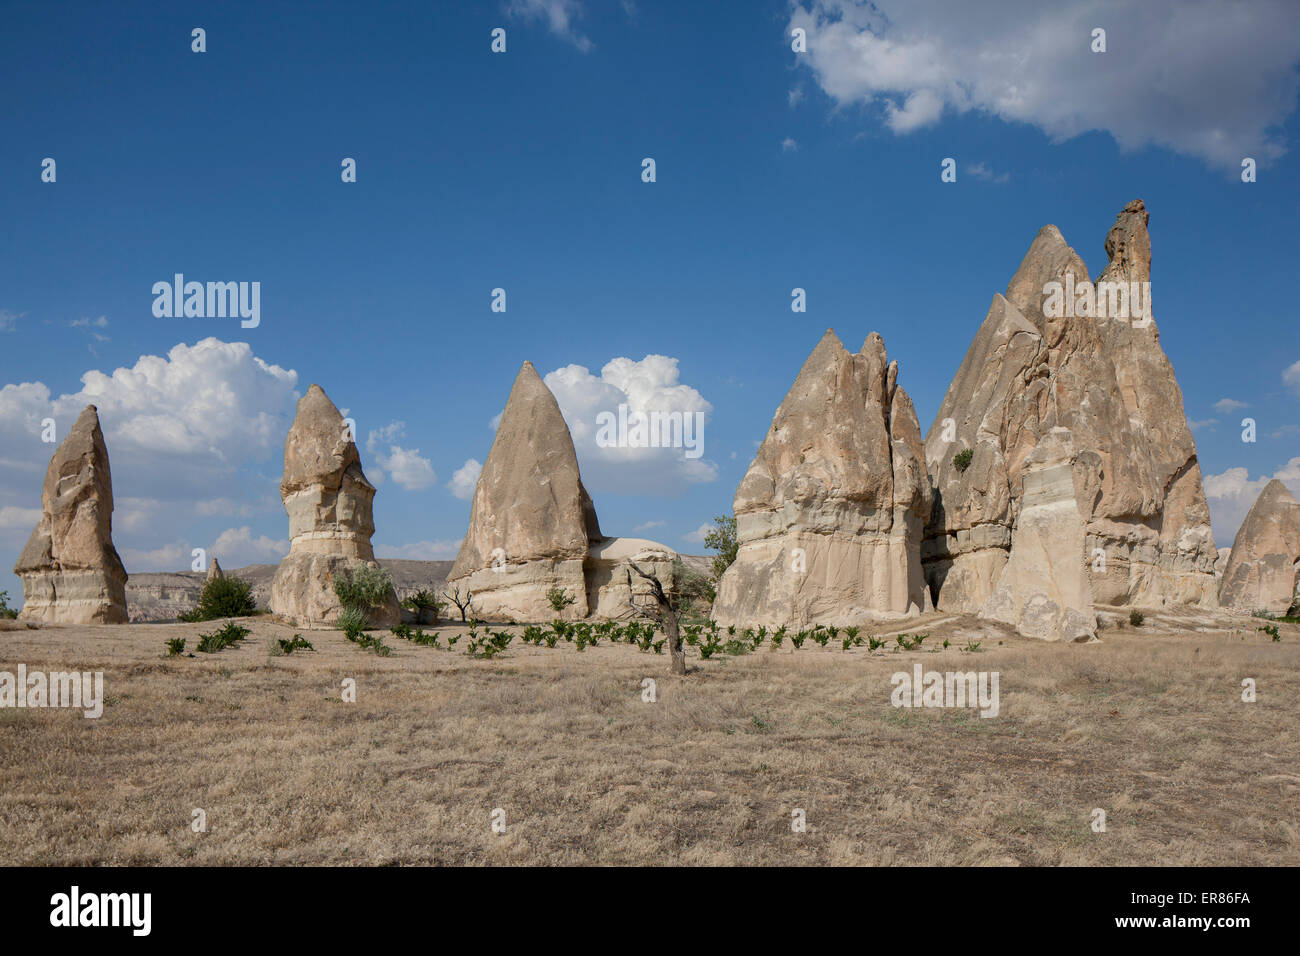 Rock formations on arid landscape against blue sky Stock Photo